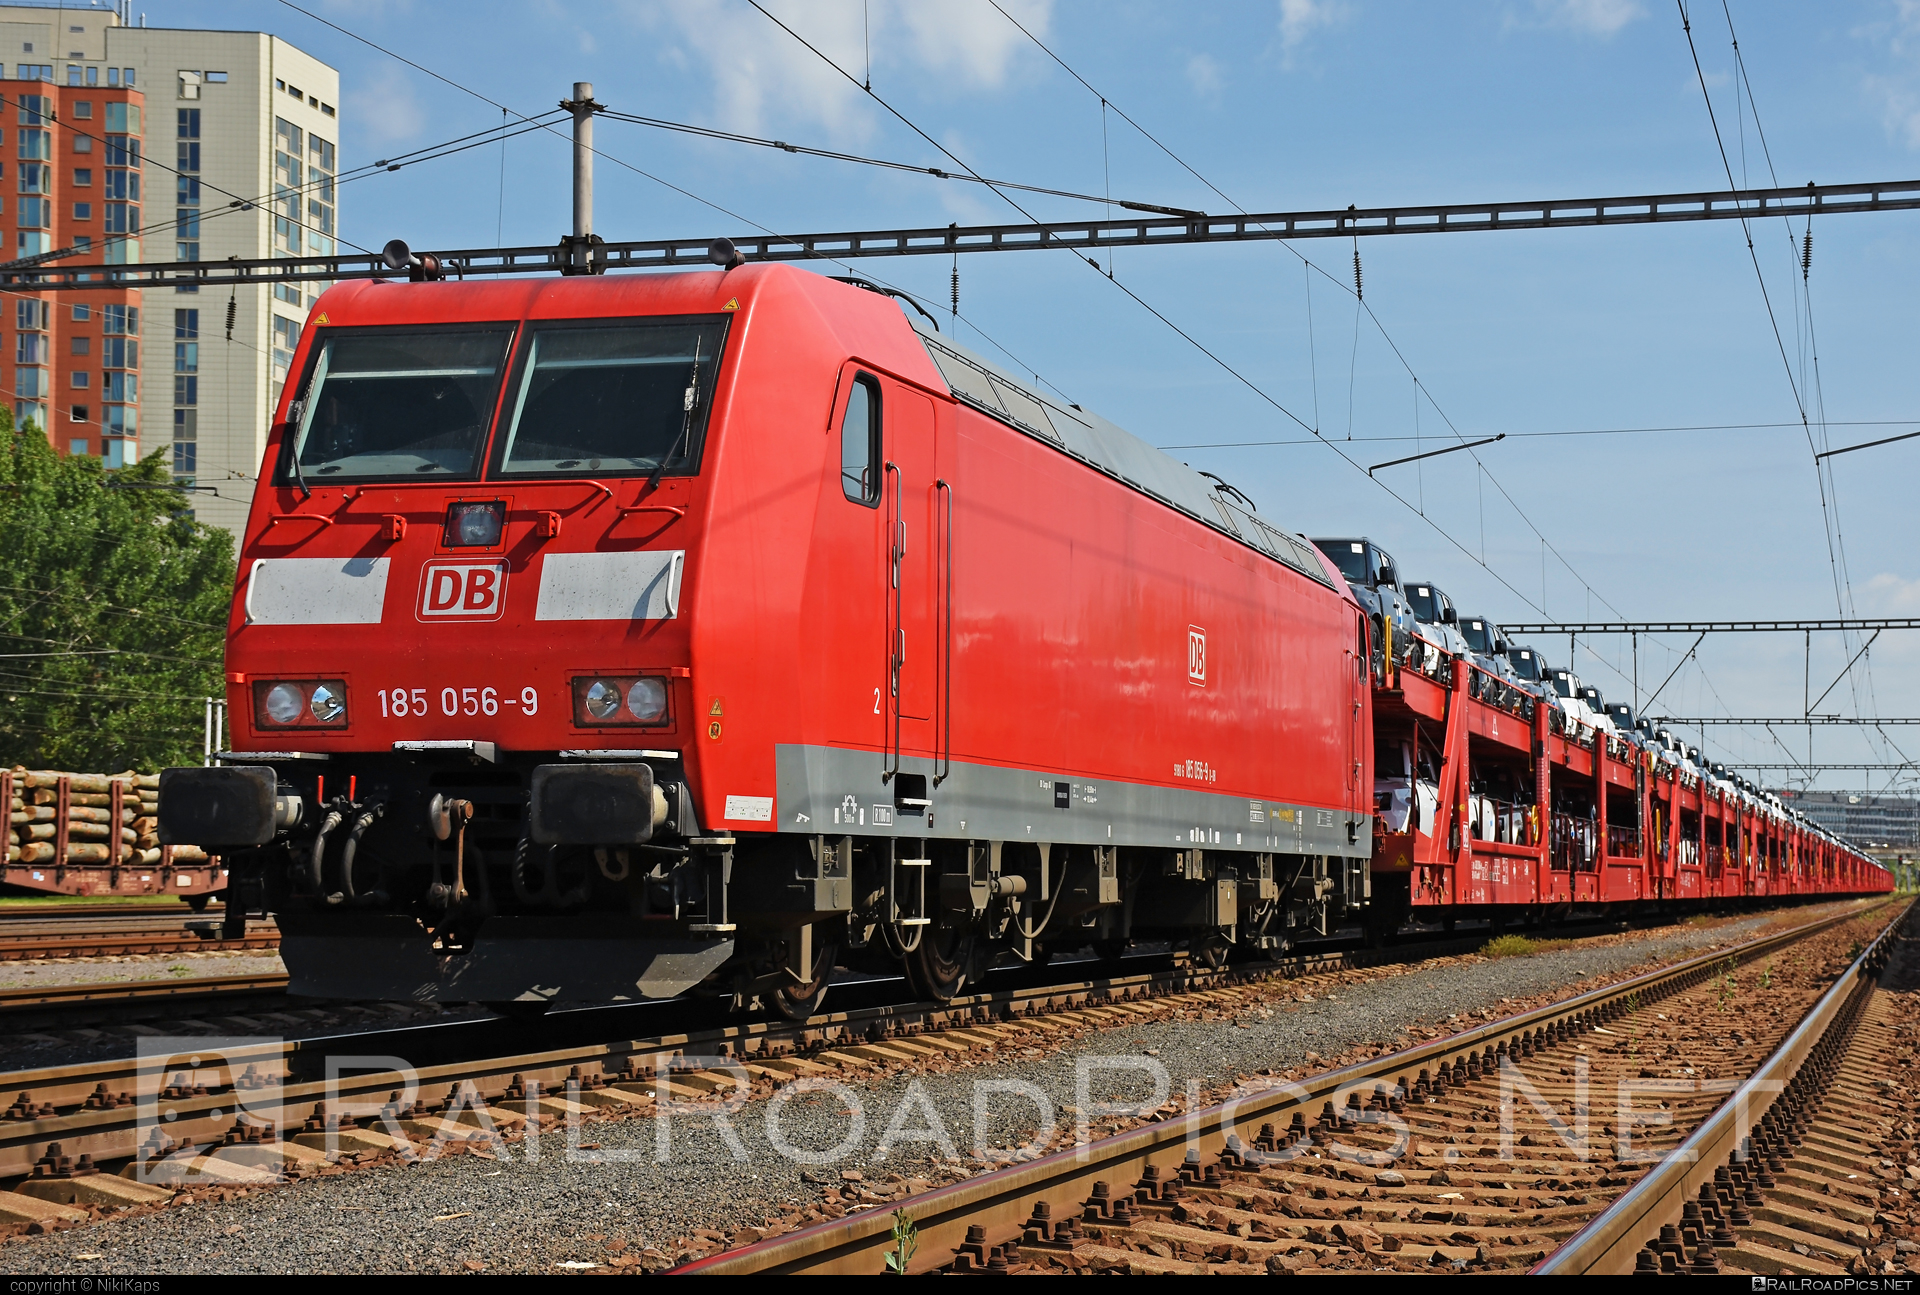 Bombardier TRAXX F140 AC1 - 185 056-9 operated by DB Cargo AG #bombardier #bombardiertraxx #carcarrierwagon #db #dbcargo #dbcargoag #traxx #traxxf140 #traxxf140ac #traxxf140ac1